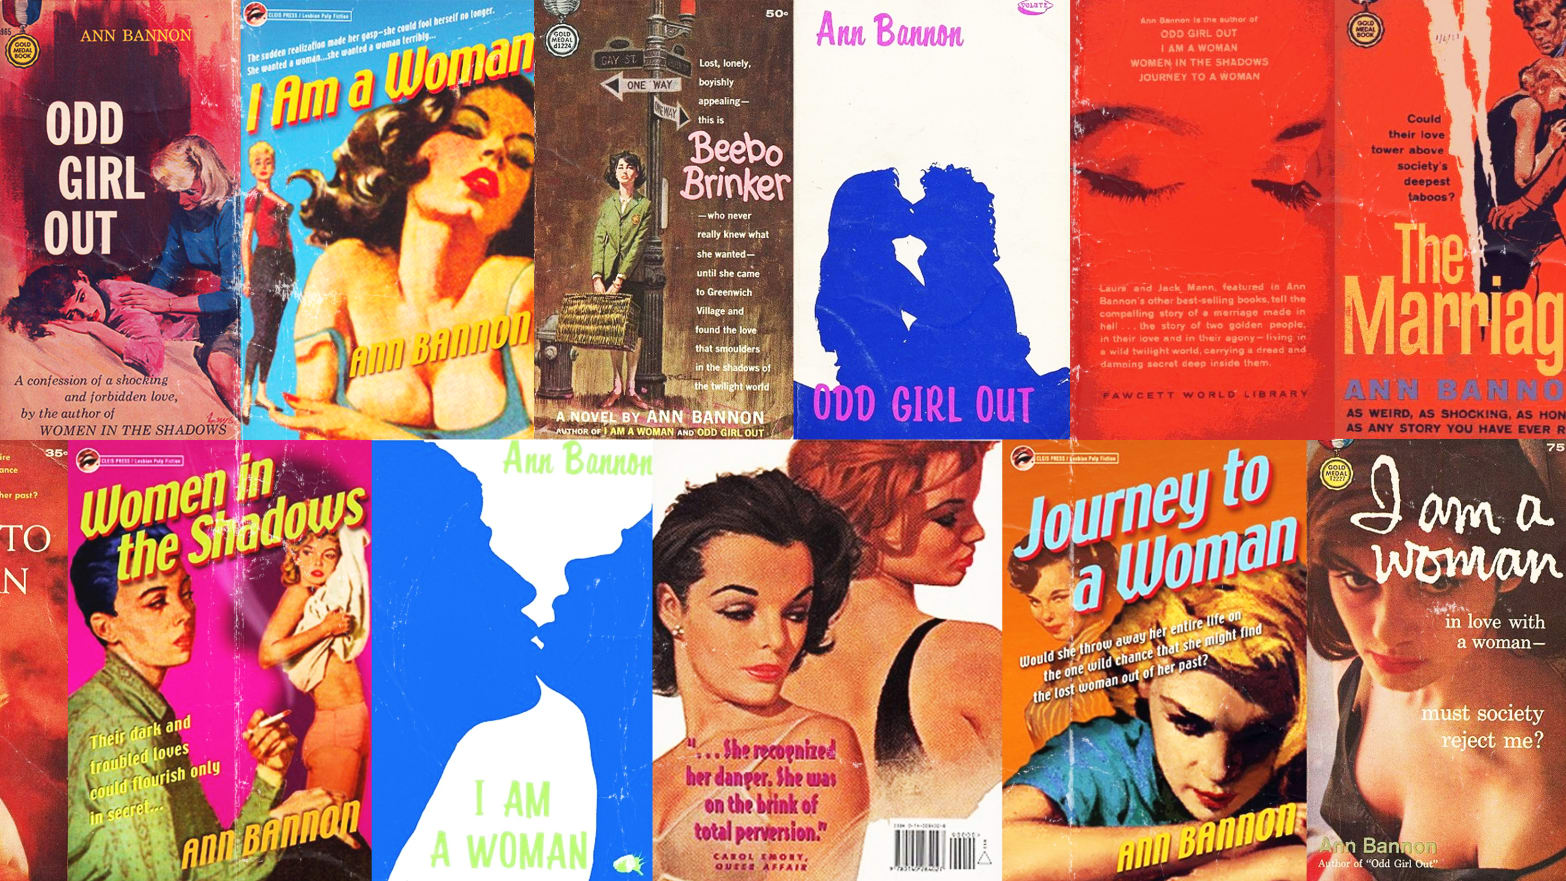 Ann Bannon, the Queen of Lesbian Pulp Fiction, Reveals Her Own Amazing Story image image photo